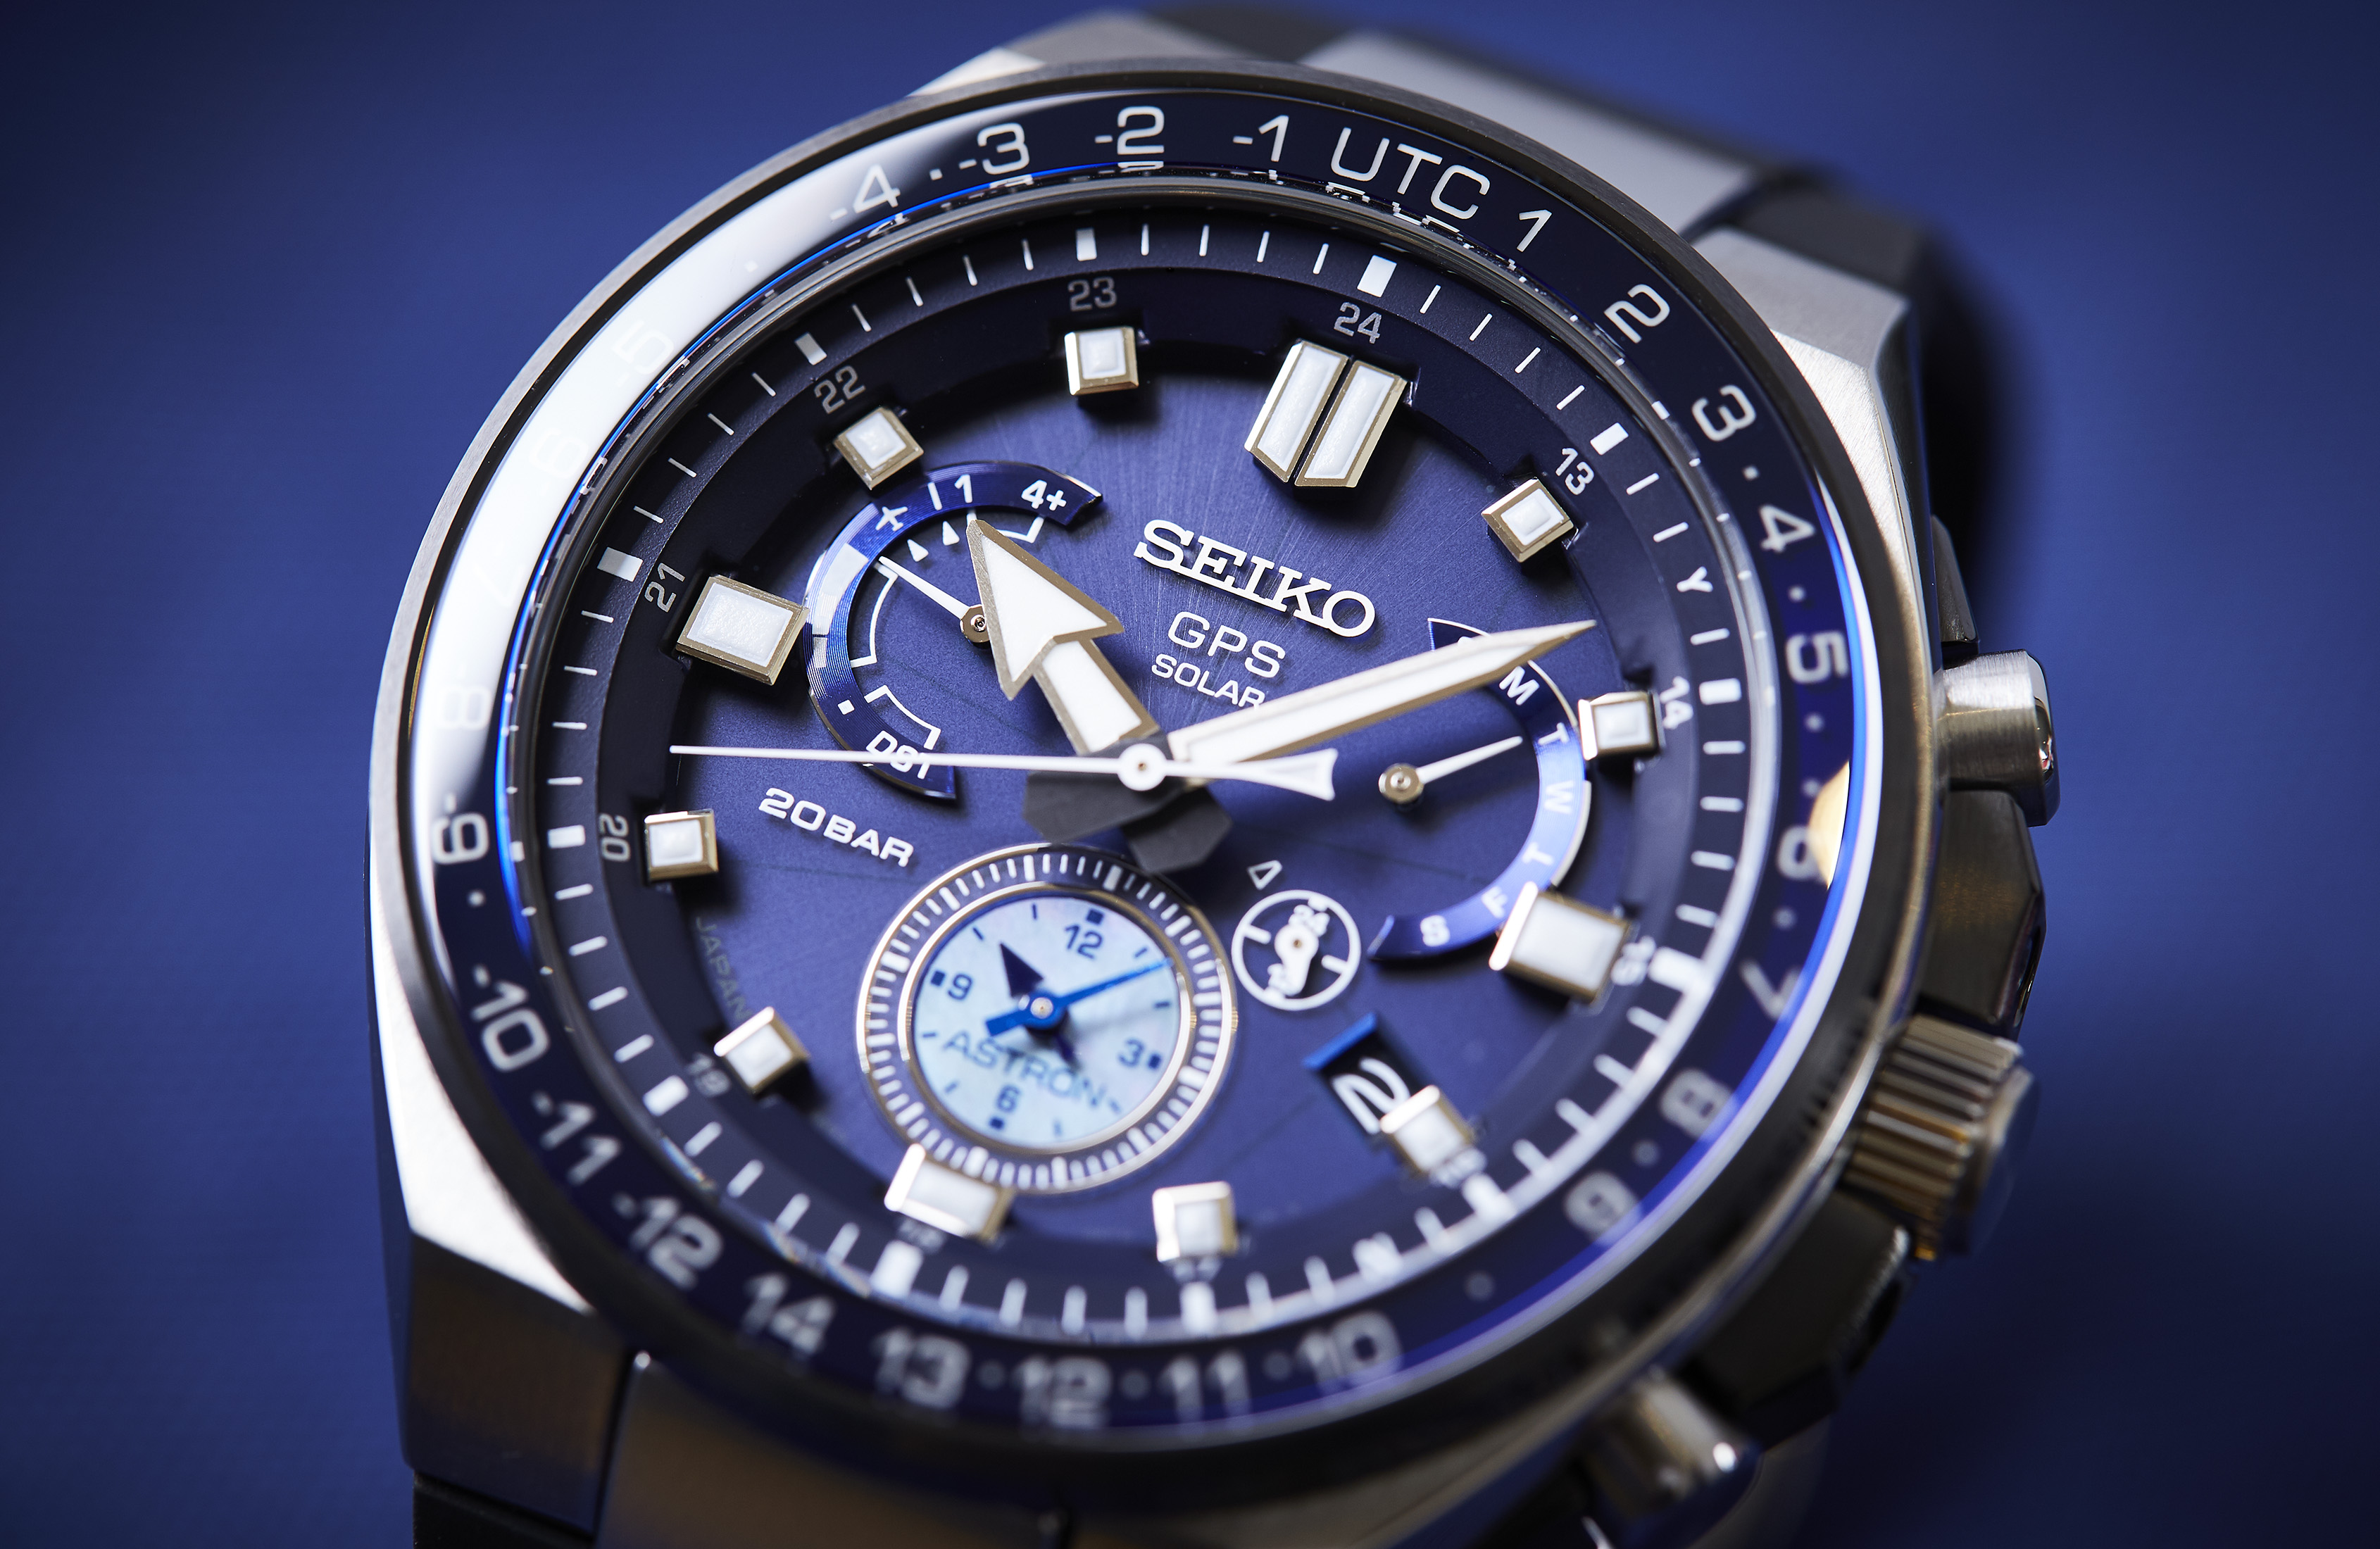 Astron GPS Solar Adds An Executive Sports Active Wear For Off-duty Seiko  Watch Corporation 